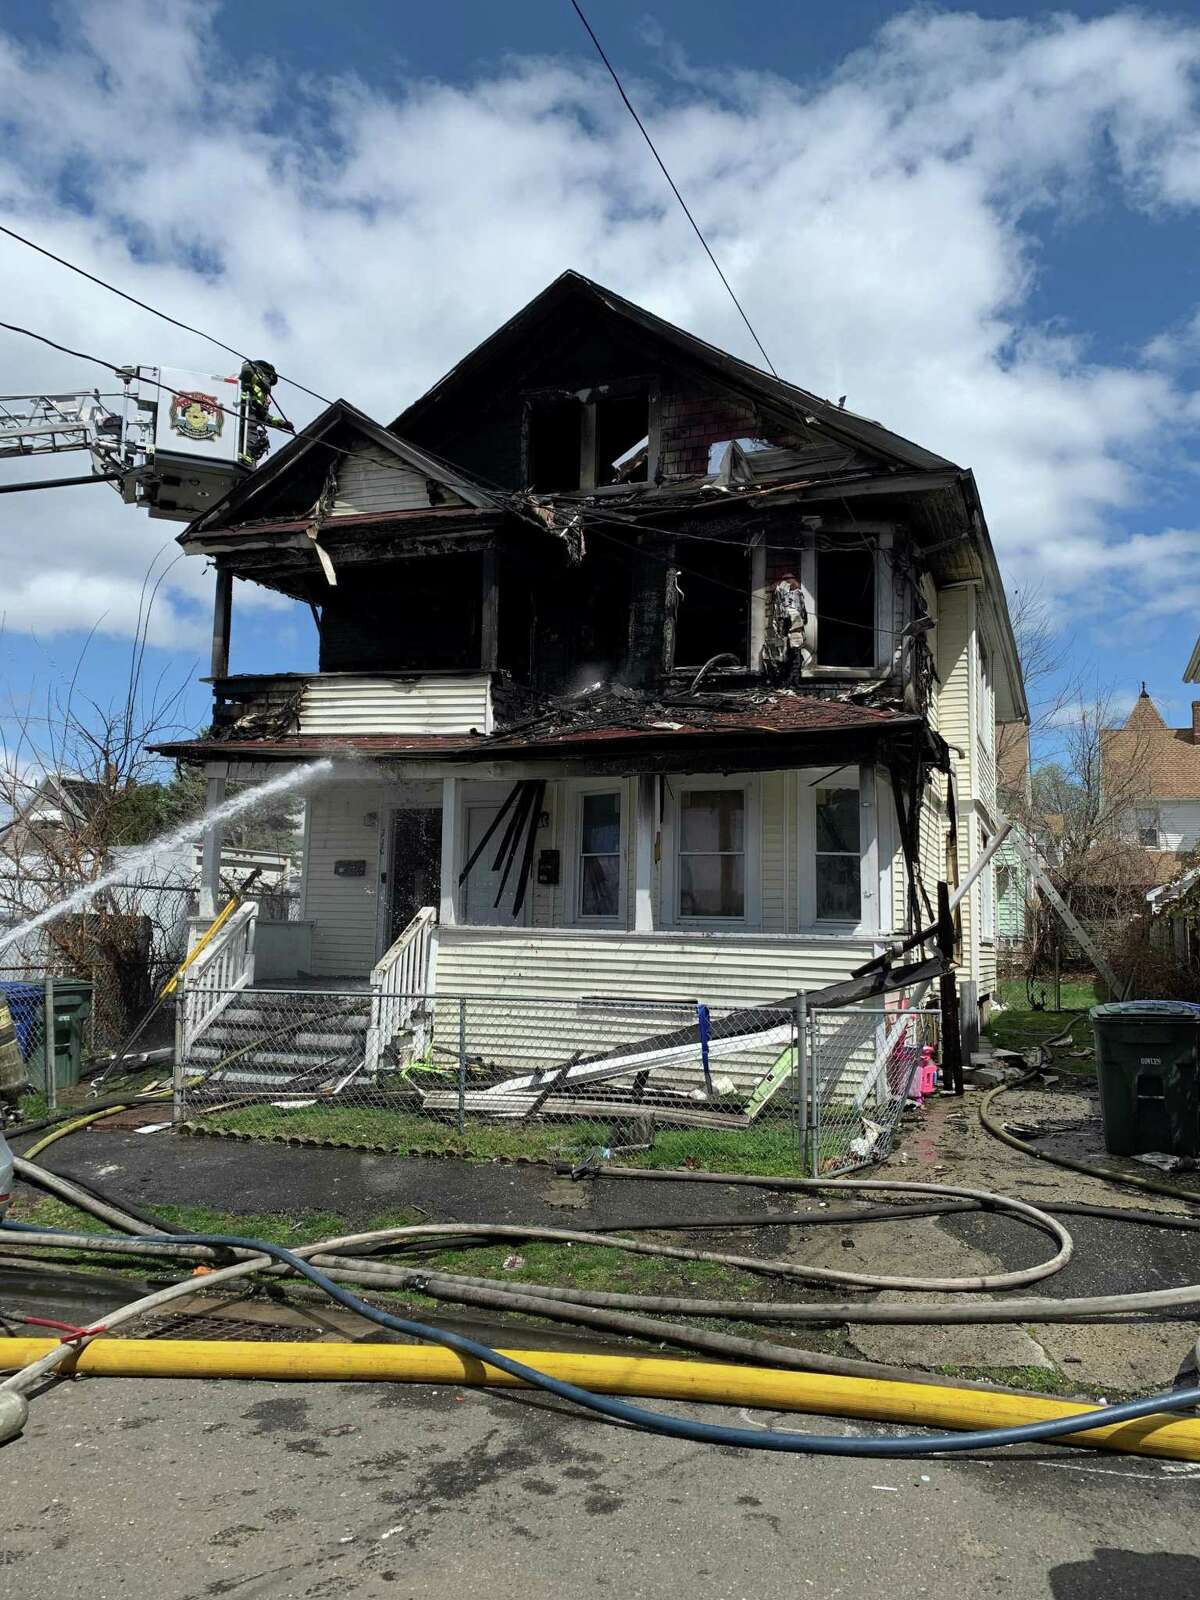 Units responded to the 200 block of Fifth Street just before 1 p.m. Sunday for a reported structure fire, officials said.